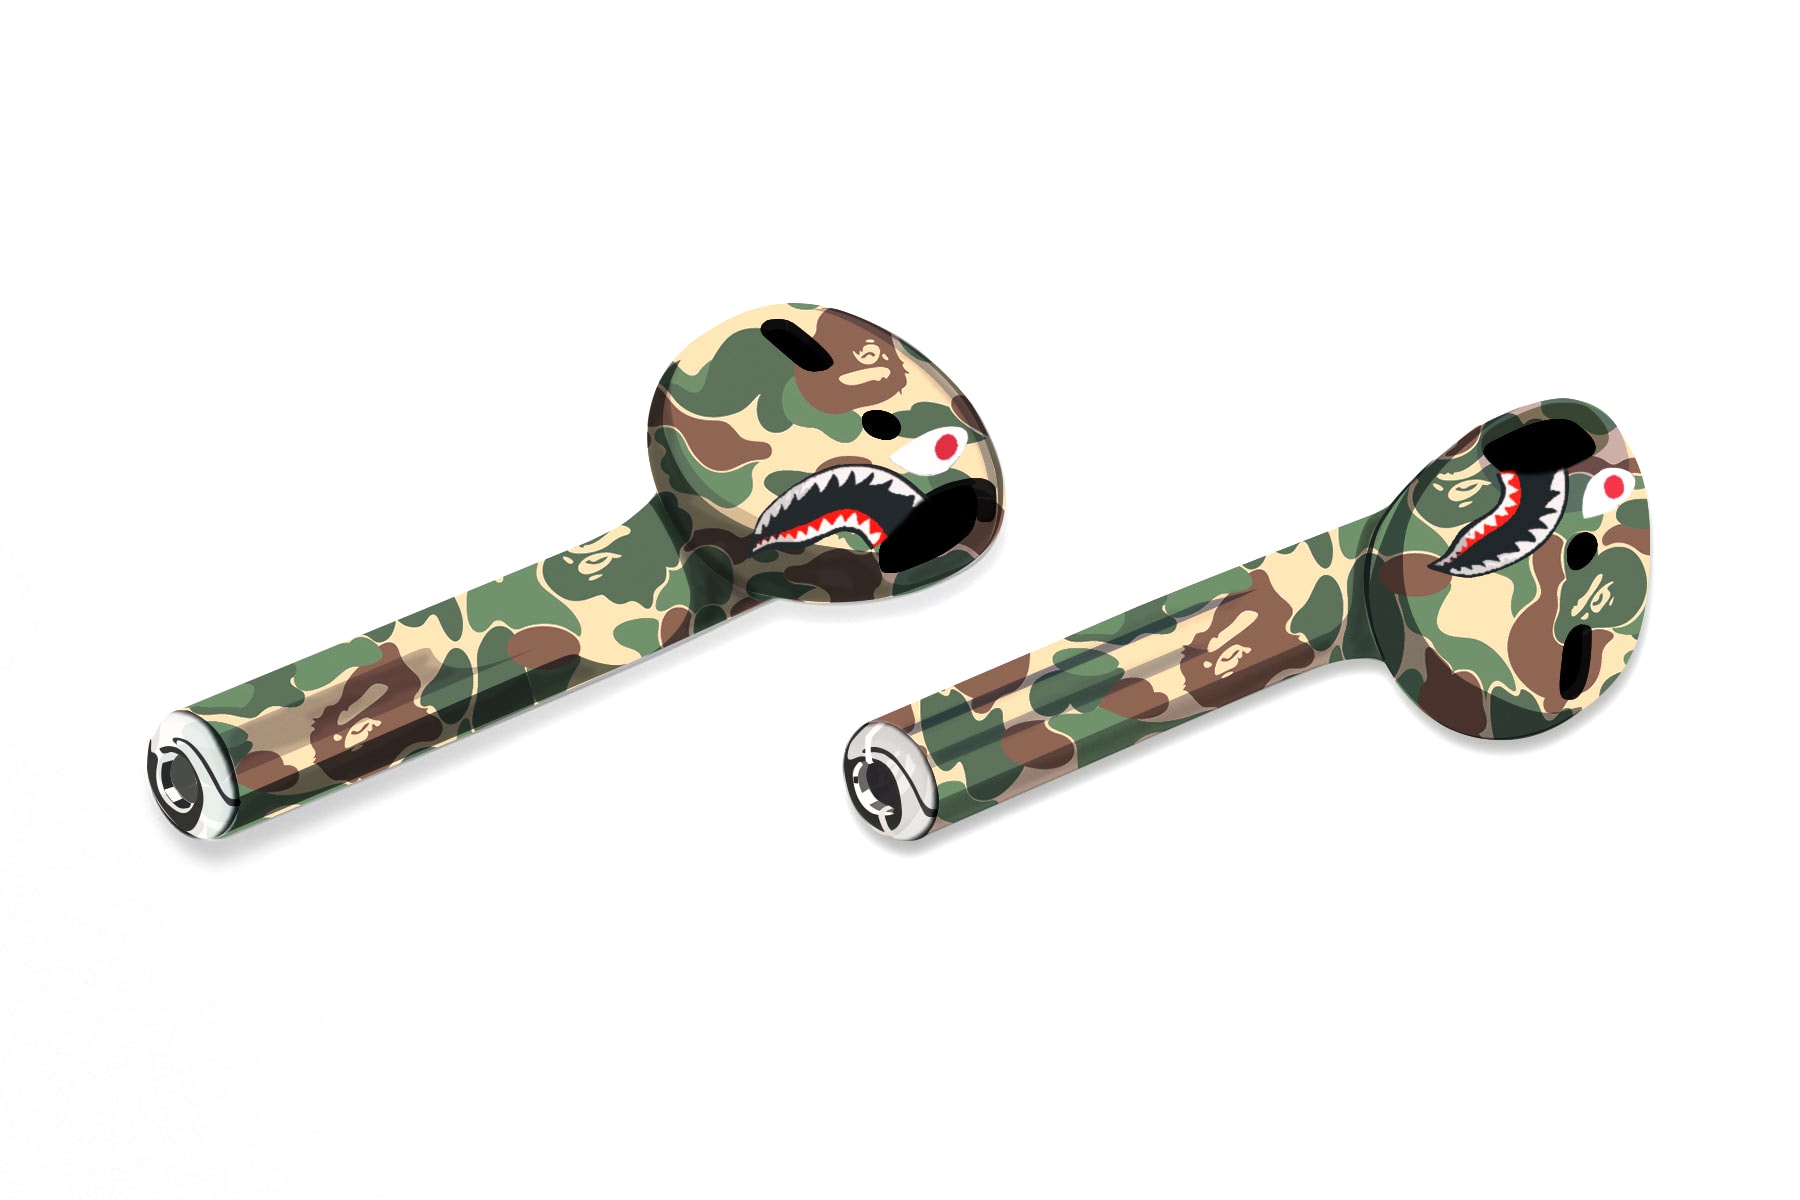 Apple Wireless AirPods Get the Streetwear Makeover Concepts BAPE A Bathing Ape OFF-WHITE Palace Skateboards Billionaire Boys Club Supreme headphones